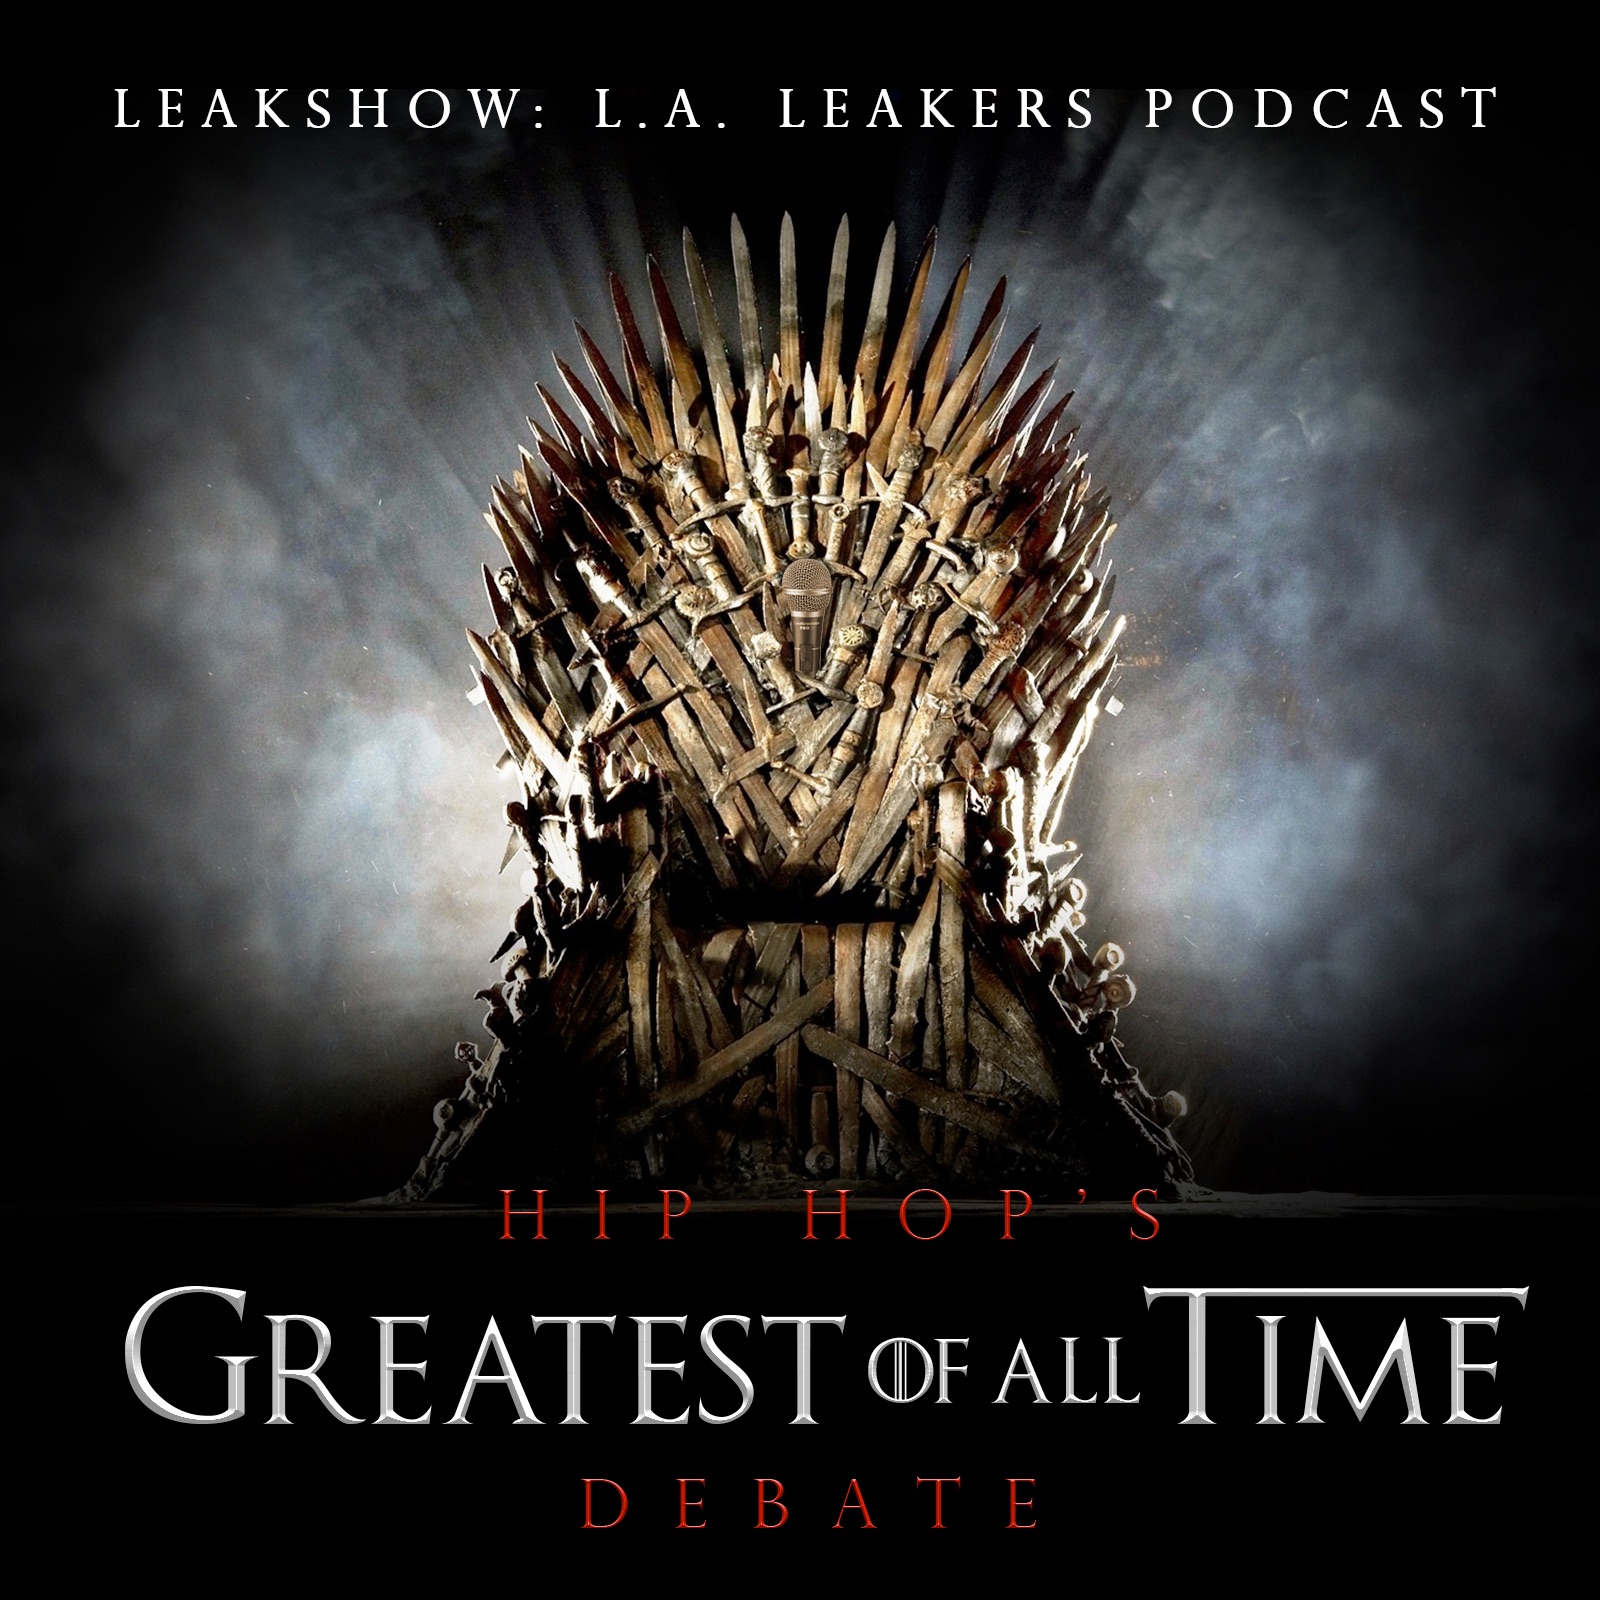 The L.A. Leakers Podcast – “Hip Hop’s G.O.A.T. Debate” (Podcast)